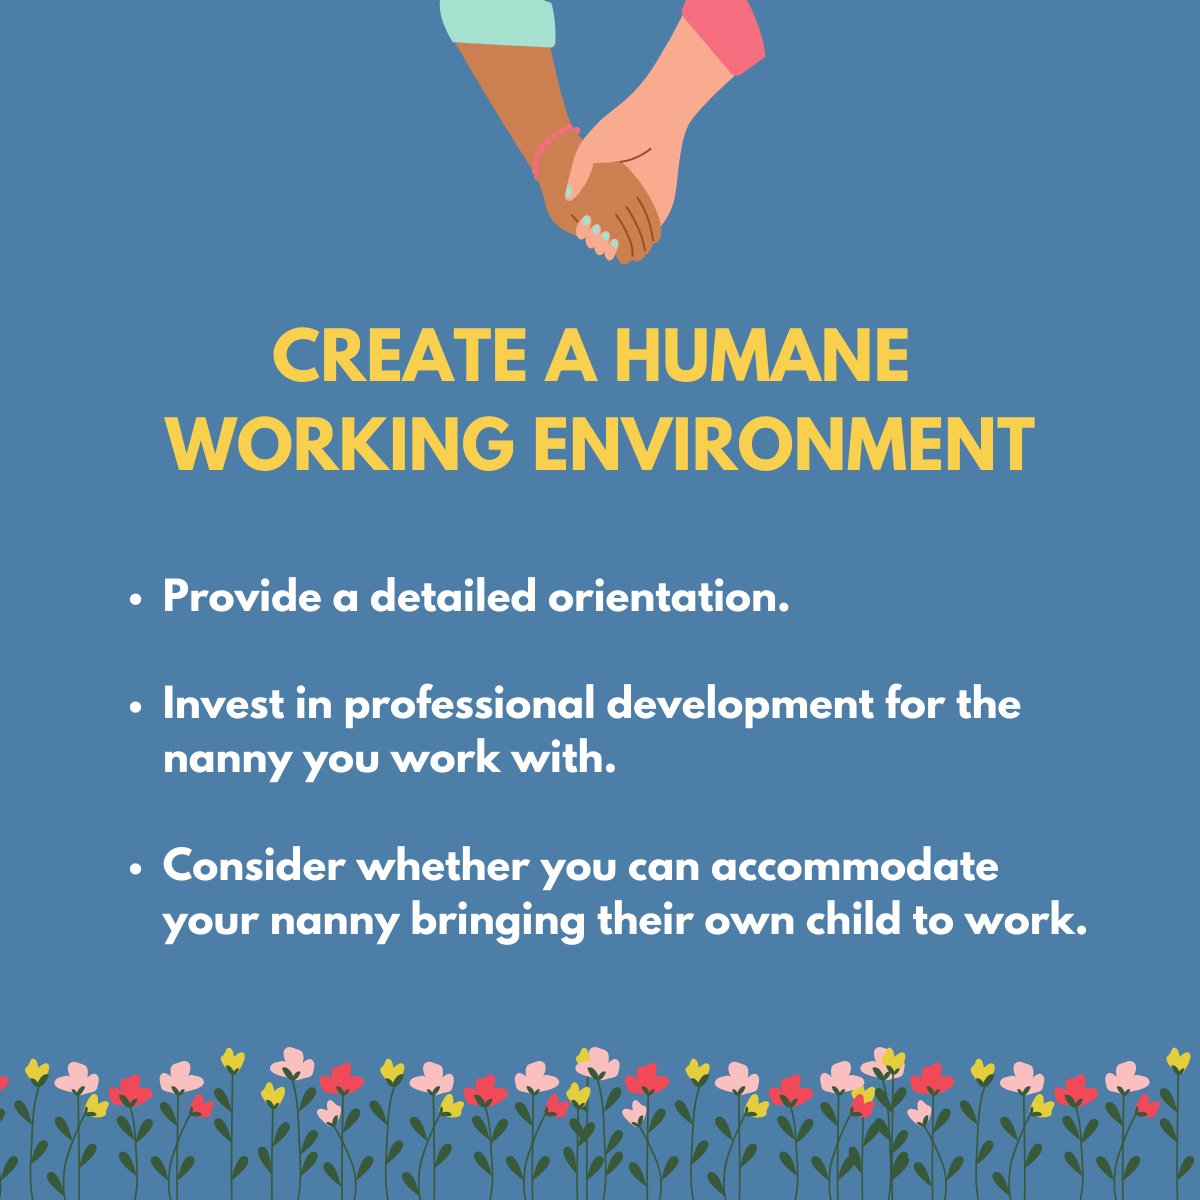 Pause for a minute: does your nanny have school-aged kids doing remote learning also? Can she bring them to work with her? Have you walked through your home classroom set-up? Think through how to create the best environment for you, your kids, and the nanny in your home. /5